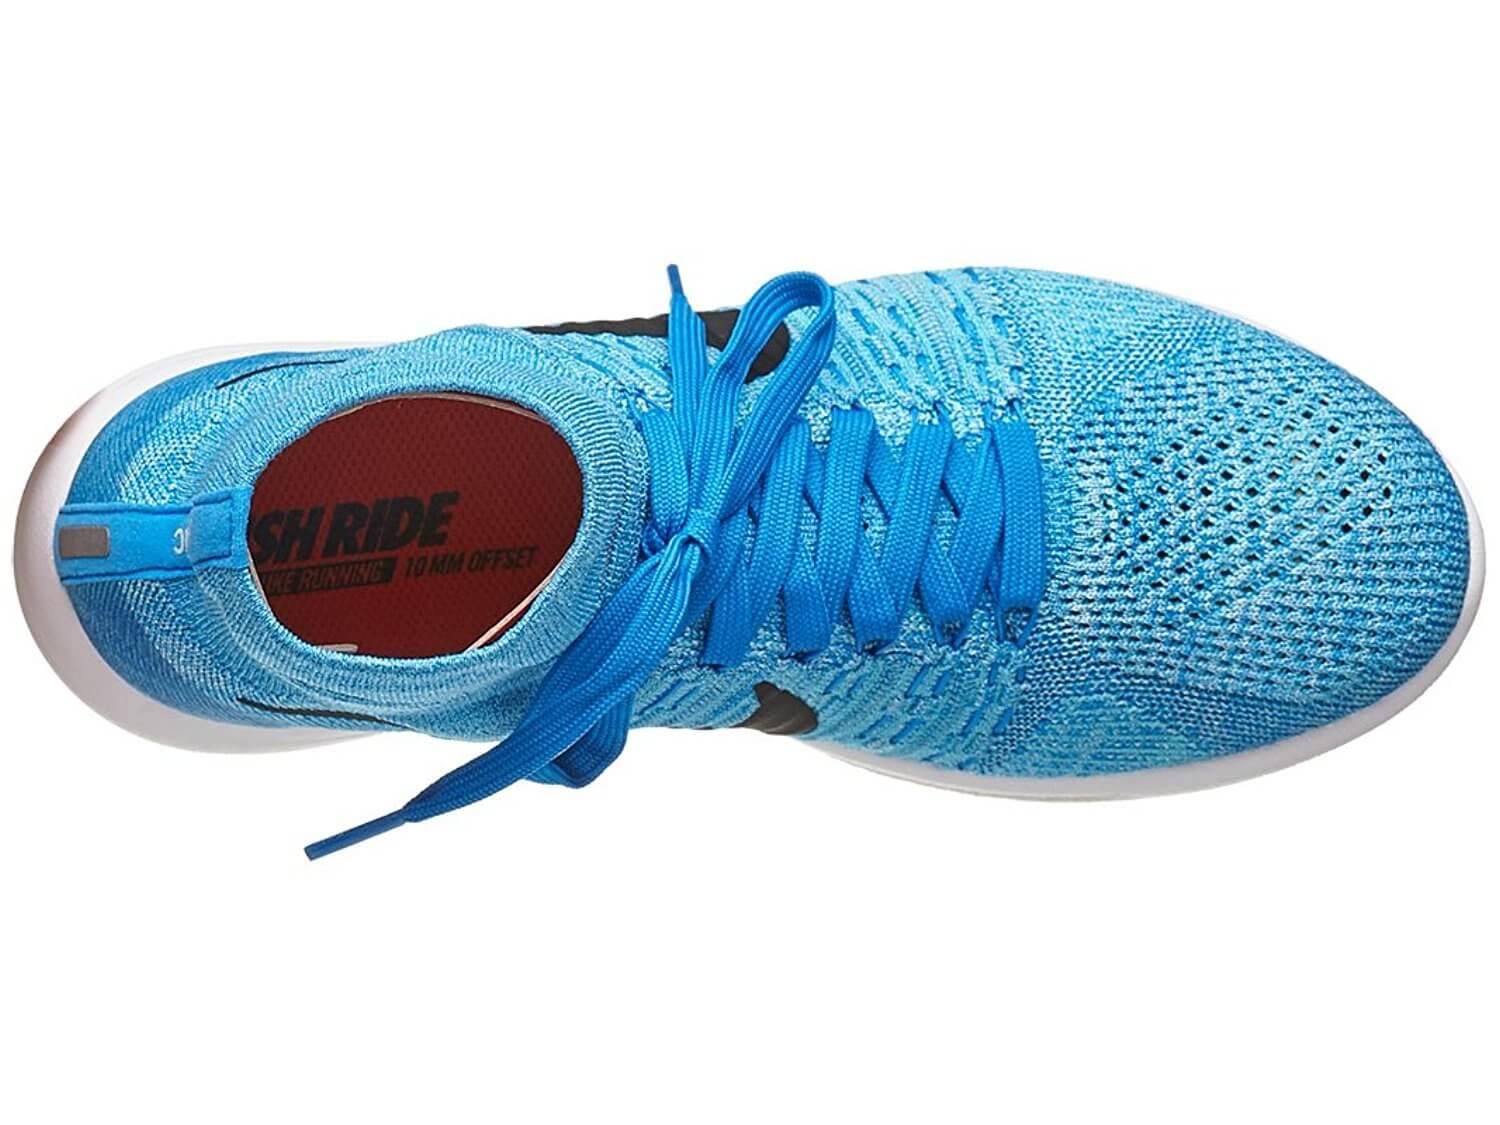 The upper portion of the Nike LunarEpic Flyknit can be ordered with a low cut or mid cut.